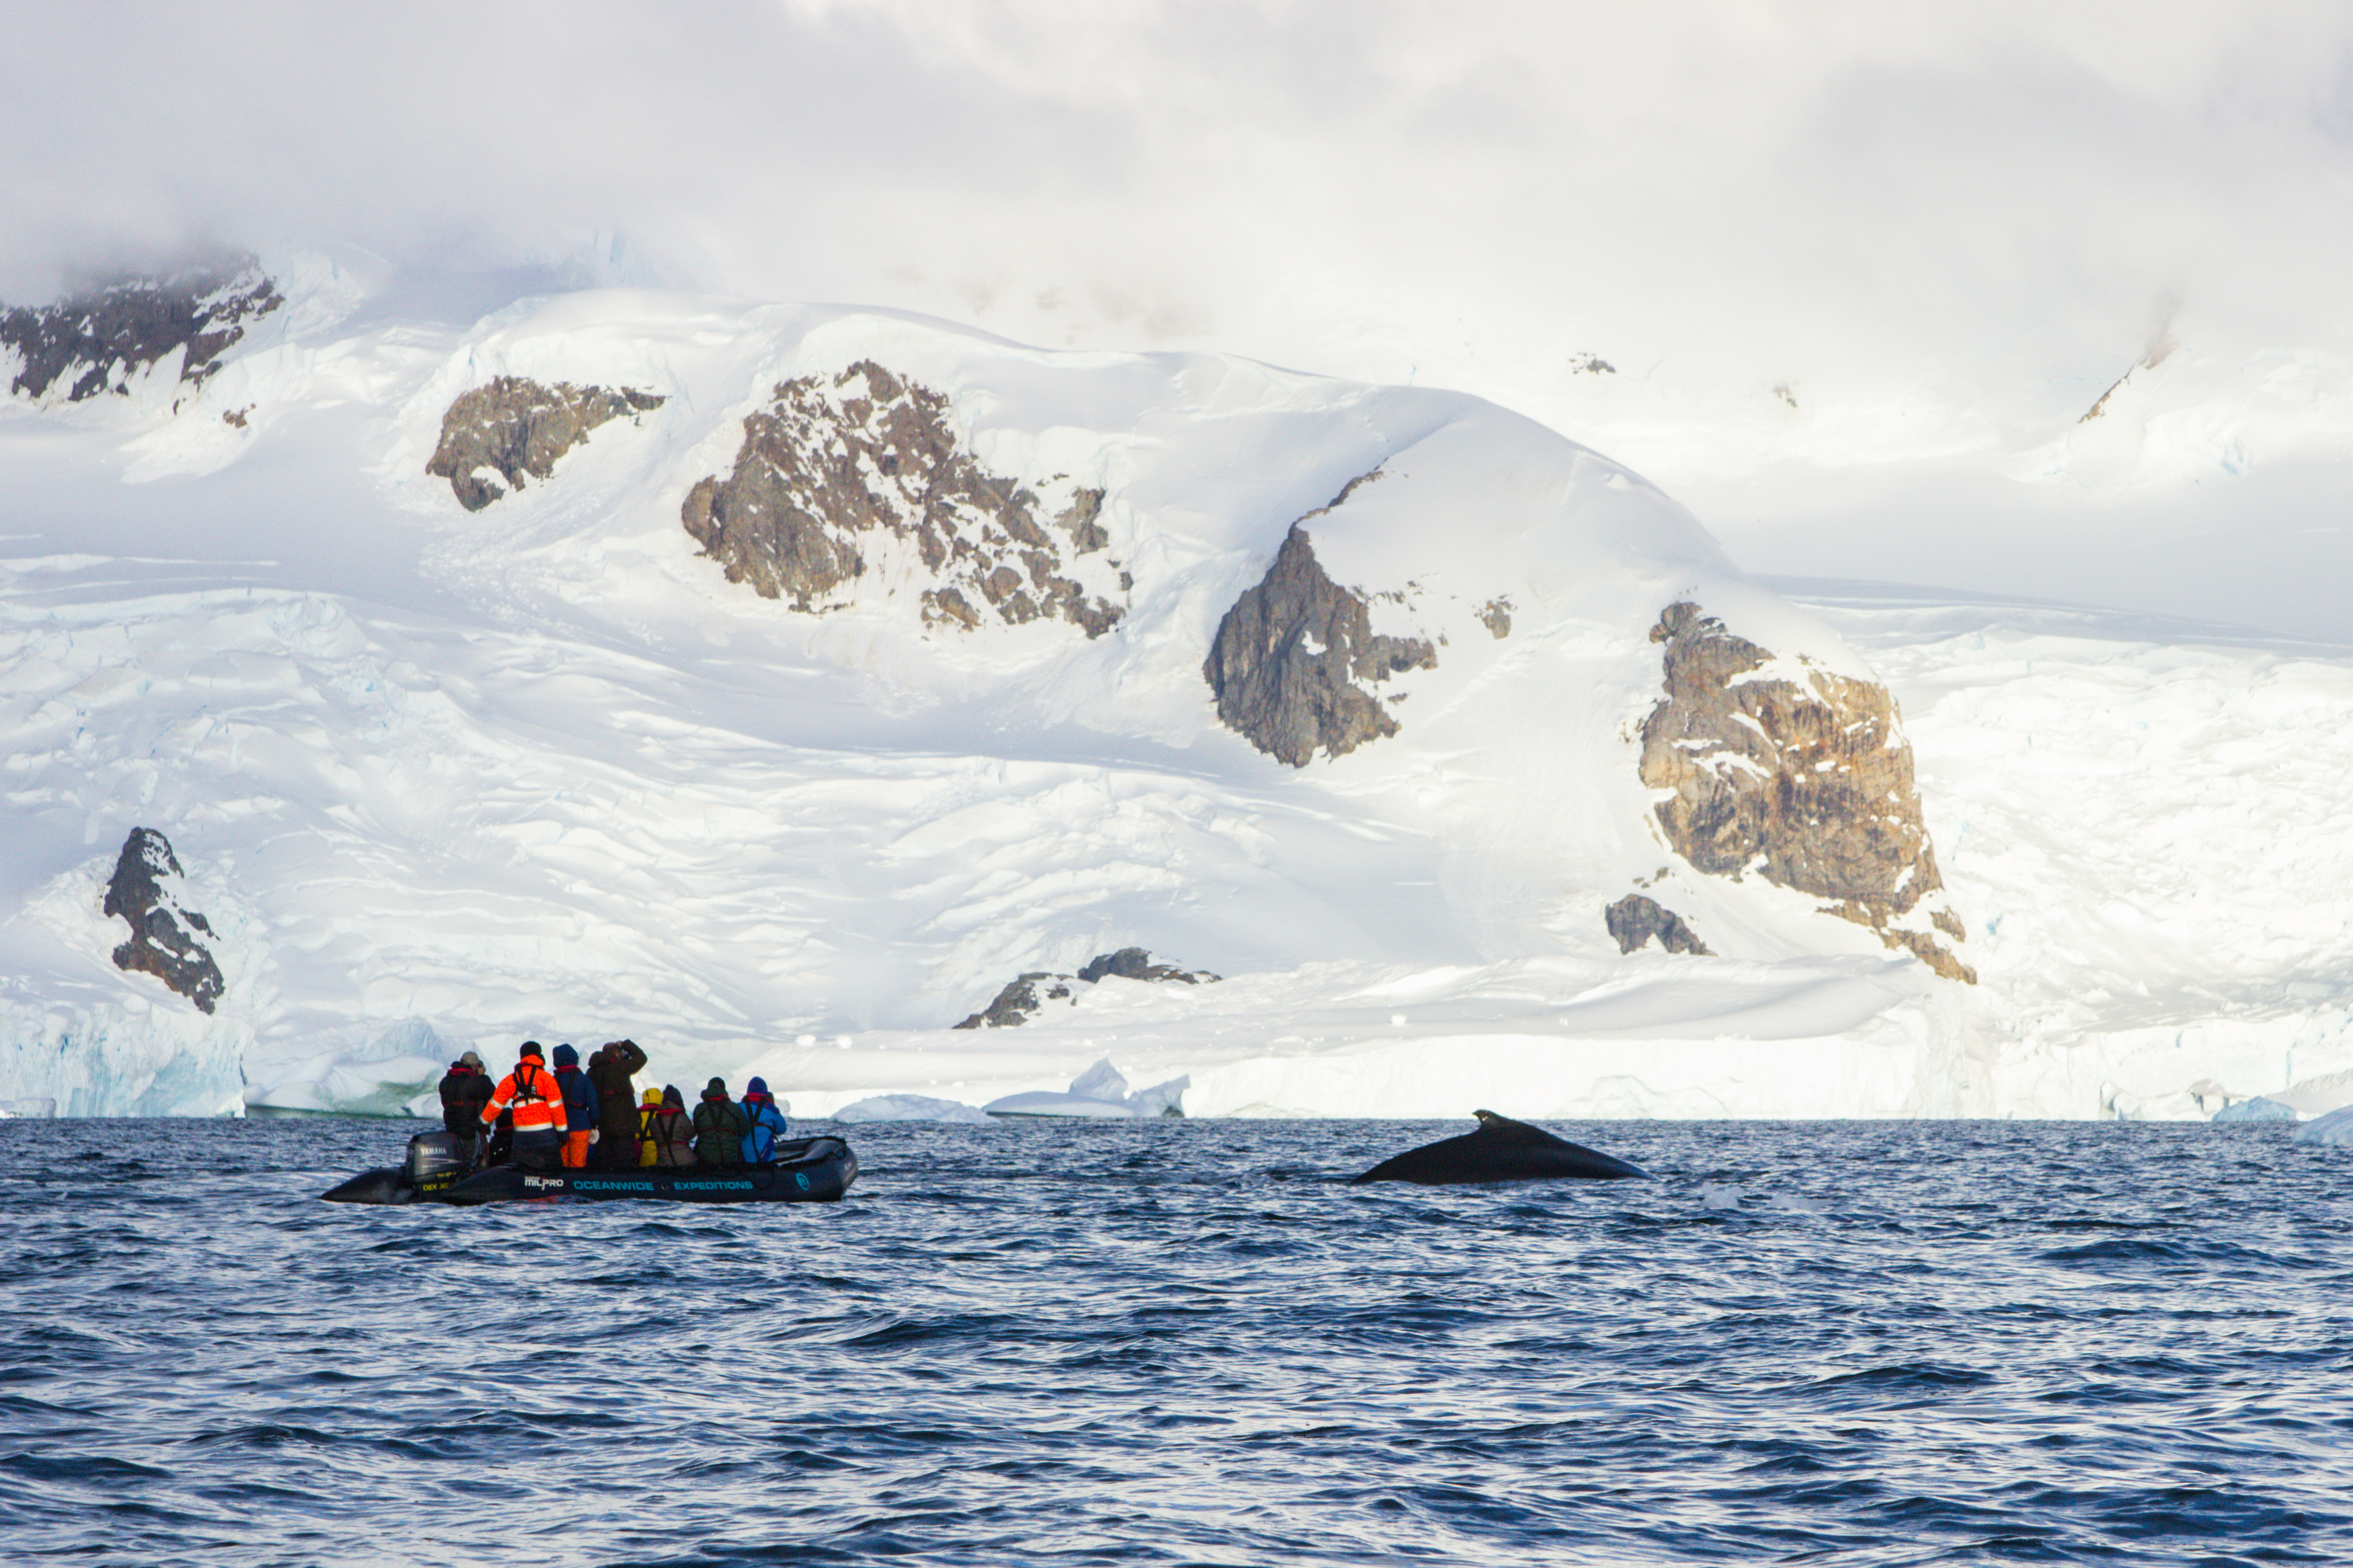 Visitors on a boat watching a whale swimming through the sea in front of a beautiful landscape of snow covered mountains